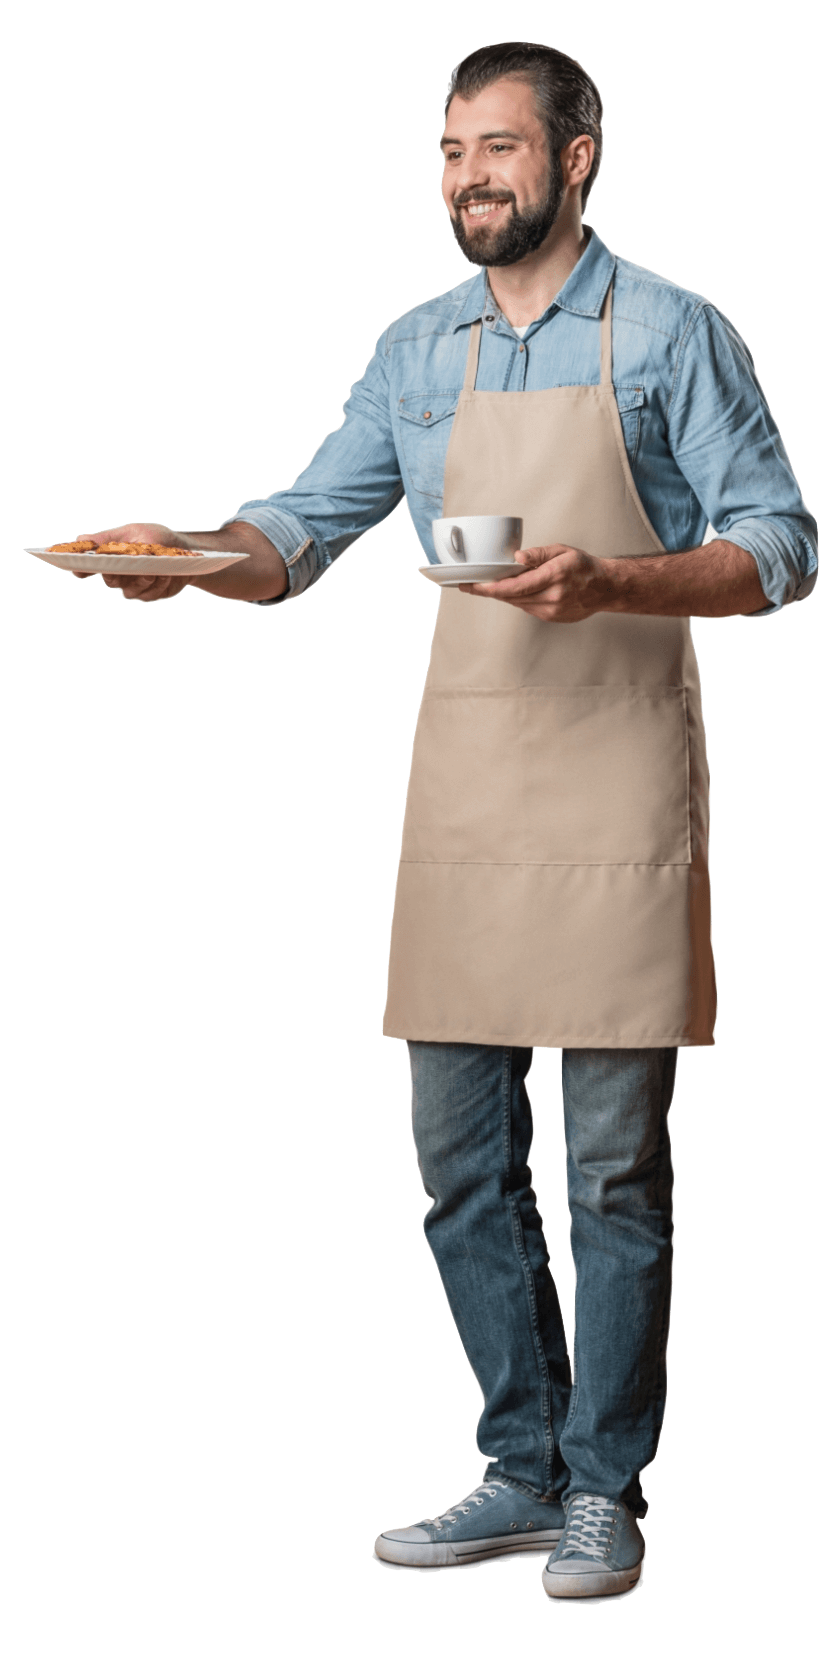 211-2111334_cut-out-man-waiter-with-food-and-coffee-professions-waiter-png (1)